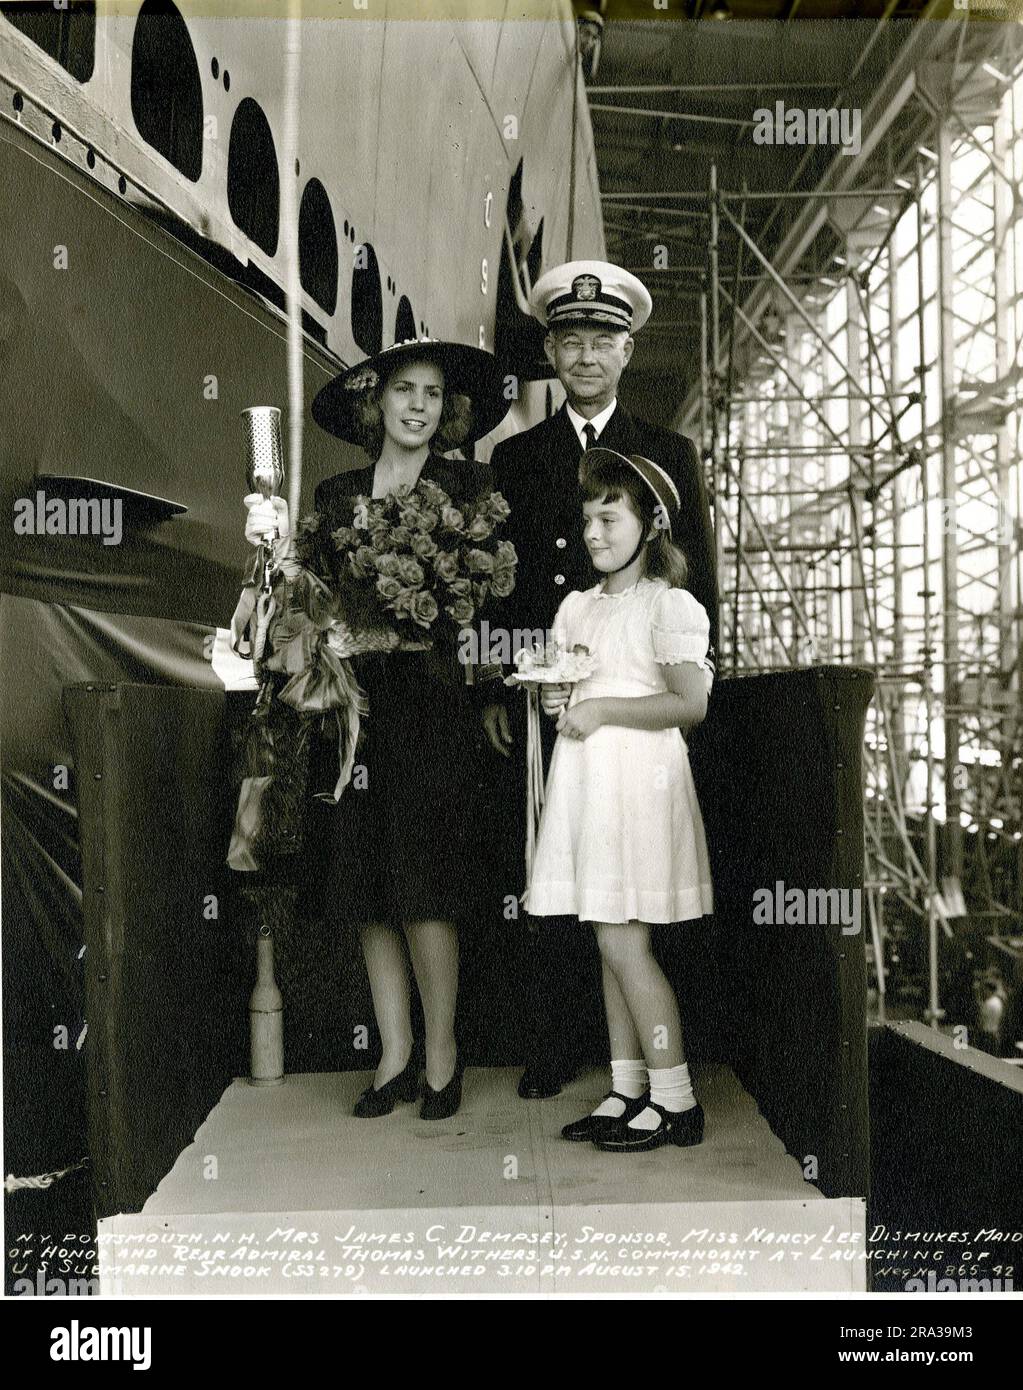 Mrs. James C. Dempsey, Sponsor, Miss Nancy Lee Dismukes, Maid of Honor, and Rear Admiral Thomas Withers. Original caption: Mrs. James C. Dempsey, sponsor, Miss Nancy Lee Dismukes, Maid of Honor, and Rear Admiral Thomas Withers at launching of U.S. Submarine Snook, Navy Yard, Portsmouth, NH.. 1942-08-15T00:00:00. Stock Photo